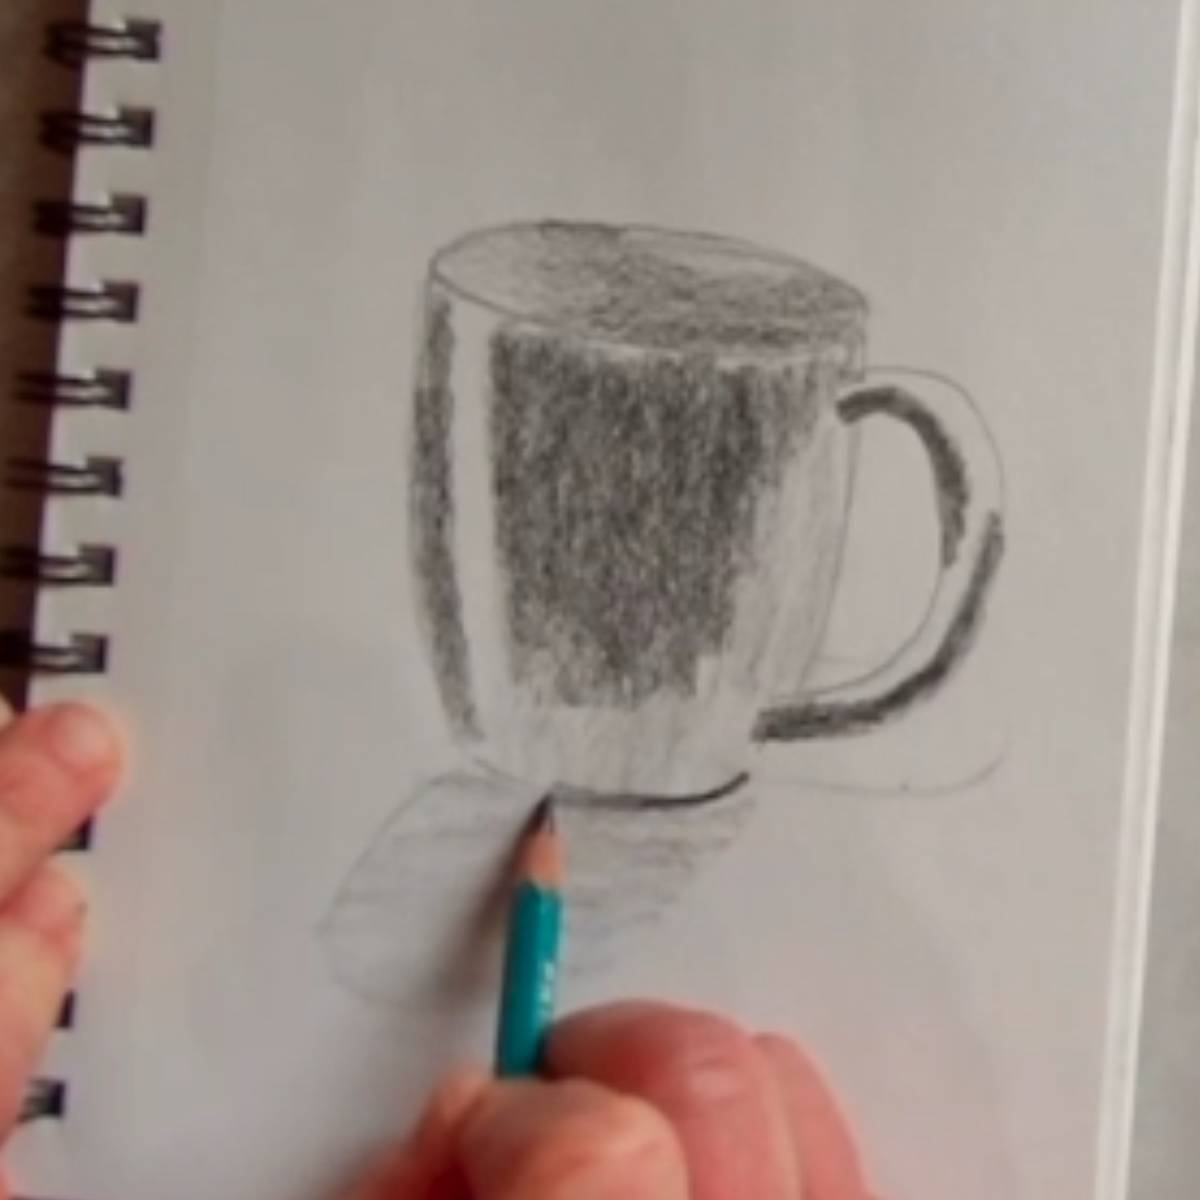 Adding in the shadows and shading to a drawing of a coffee mug in pencil.